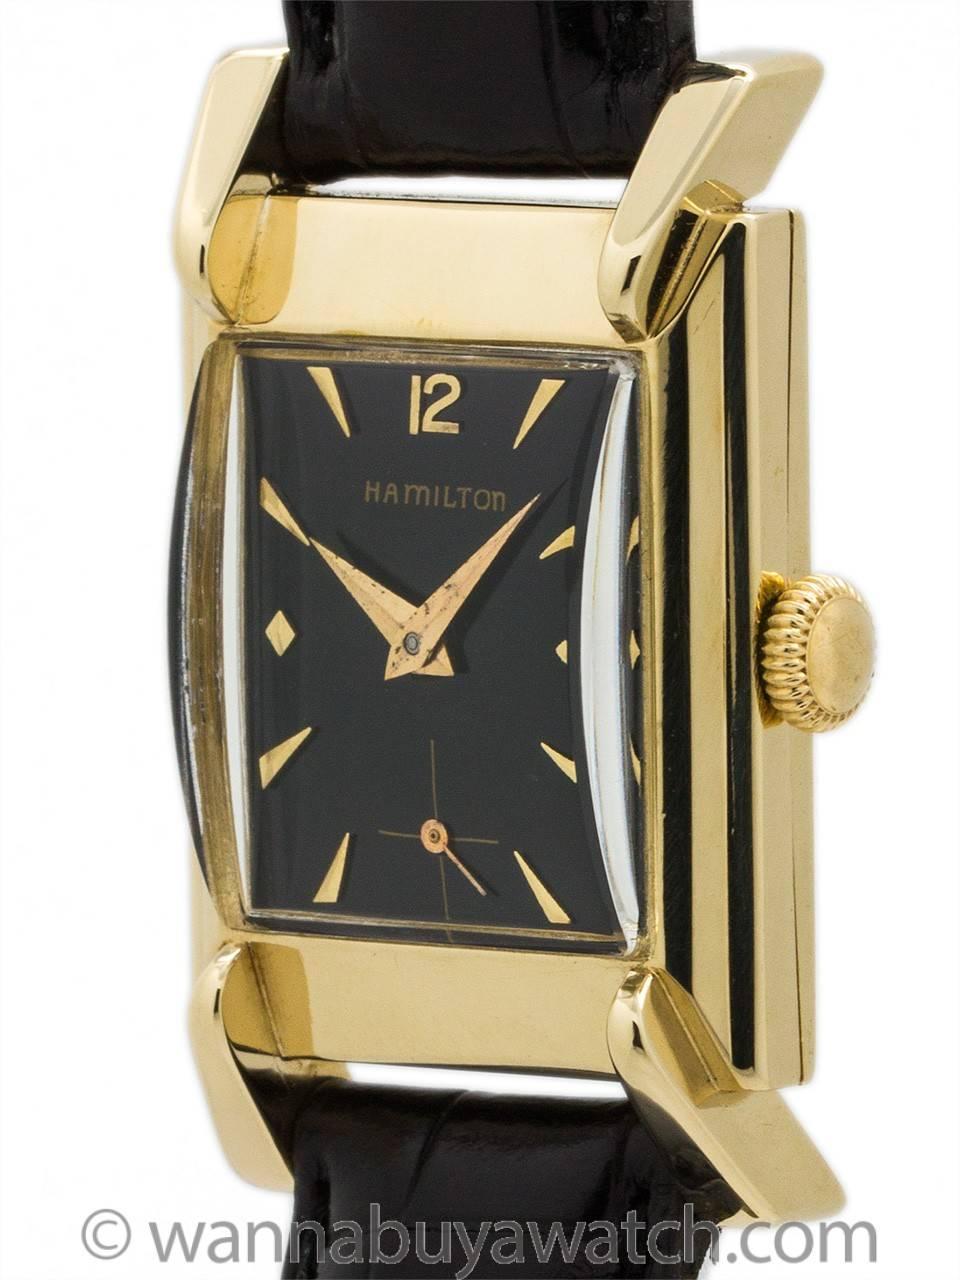 Scarce model man’s Hamilton “Drake” 14K gold circa 1951. Featuring 25 X 39mm sculpted case with flared “grasshopper” lugs, wide bezel, domed crystal, and glossy black restored dial with applied gold indexes and tapered gilt hands. Powered by